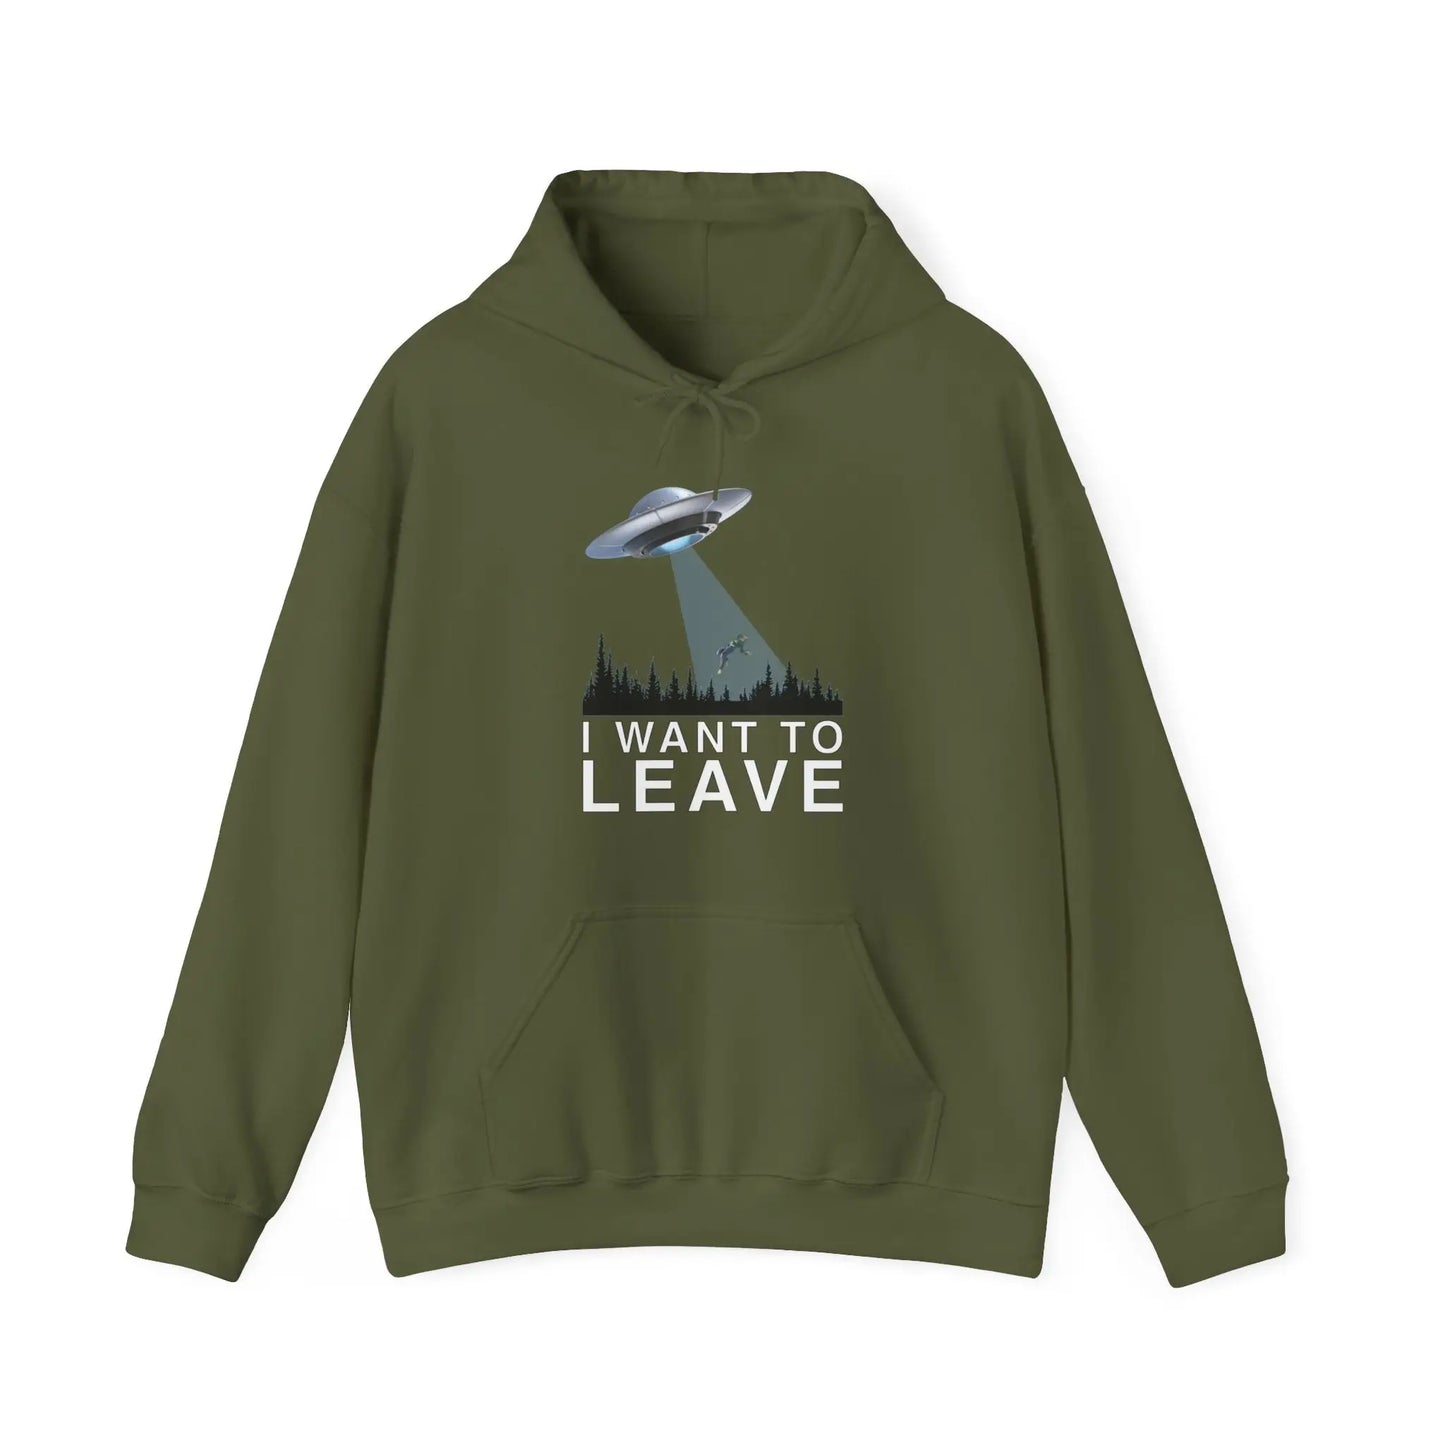 I Want To Leave Men's Hooded Sweatshirt - Wicked Tees